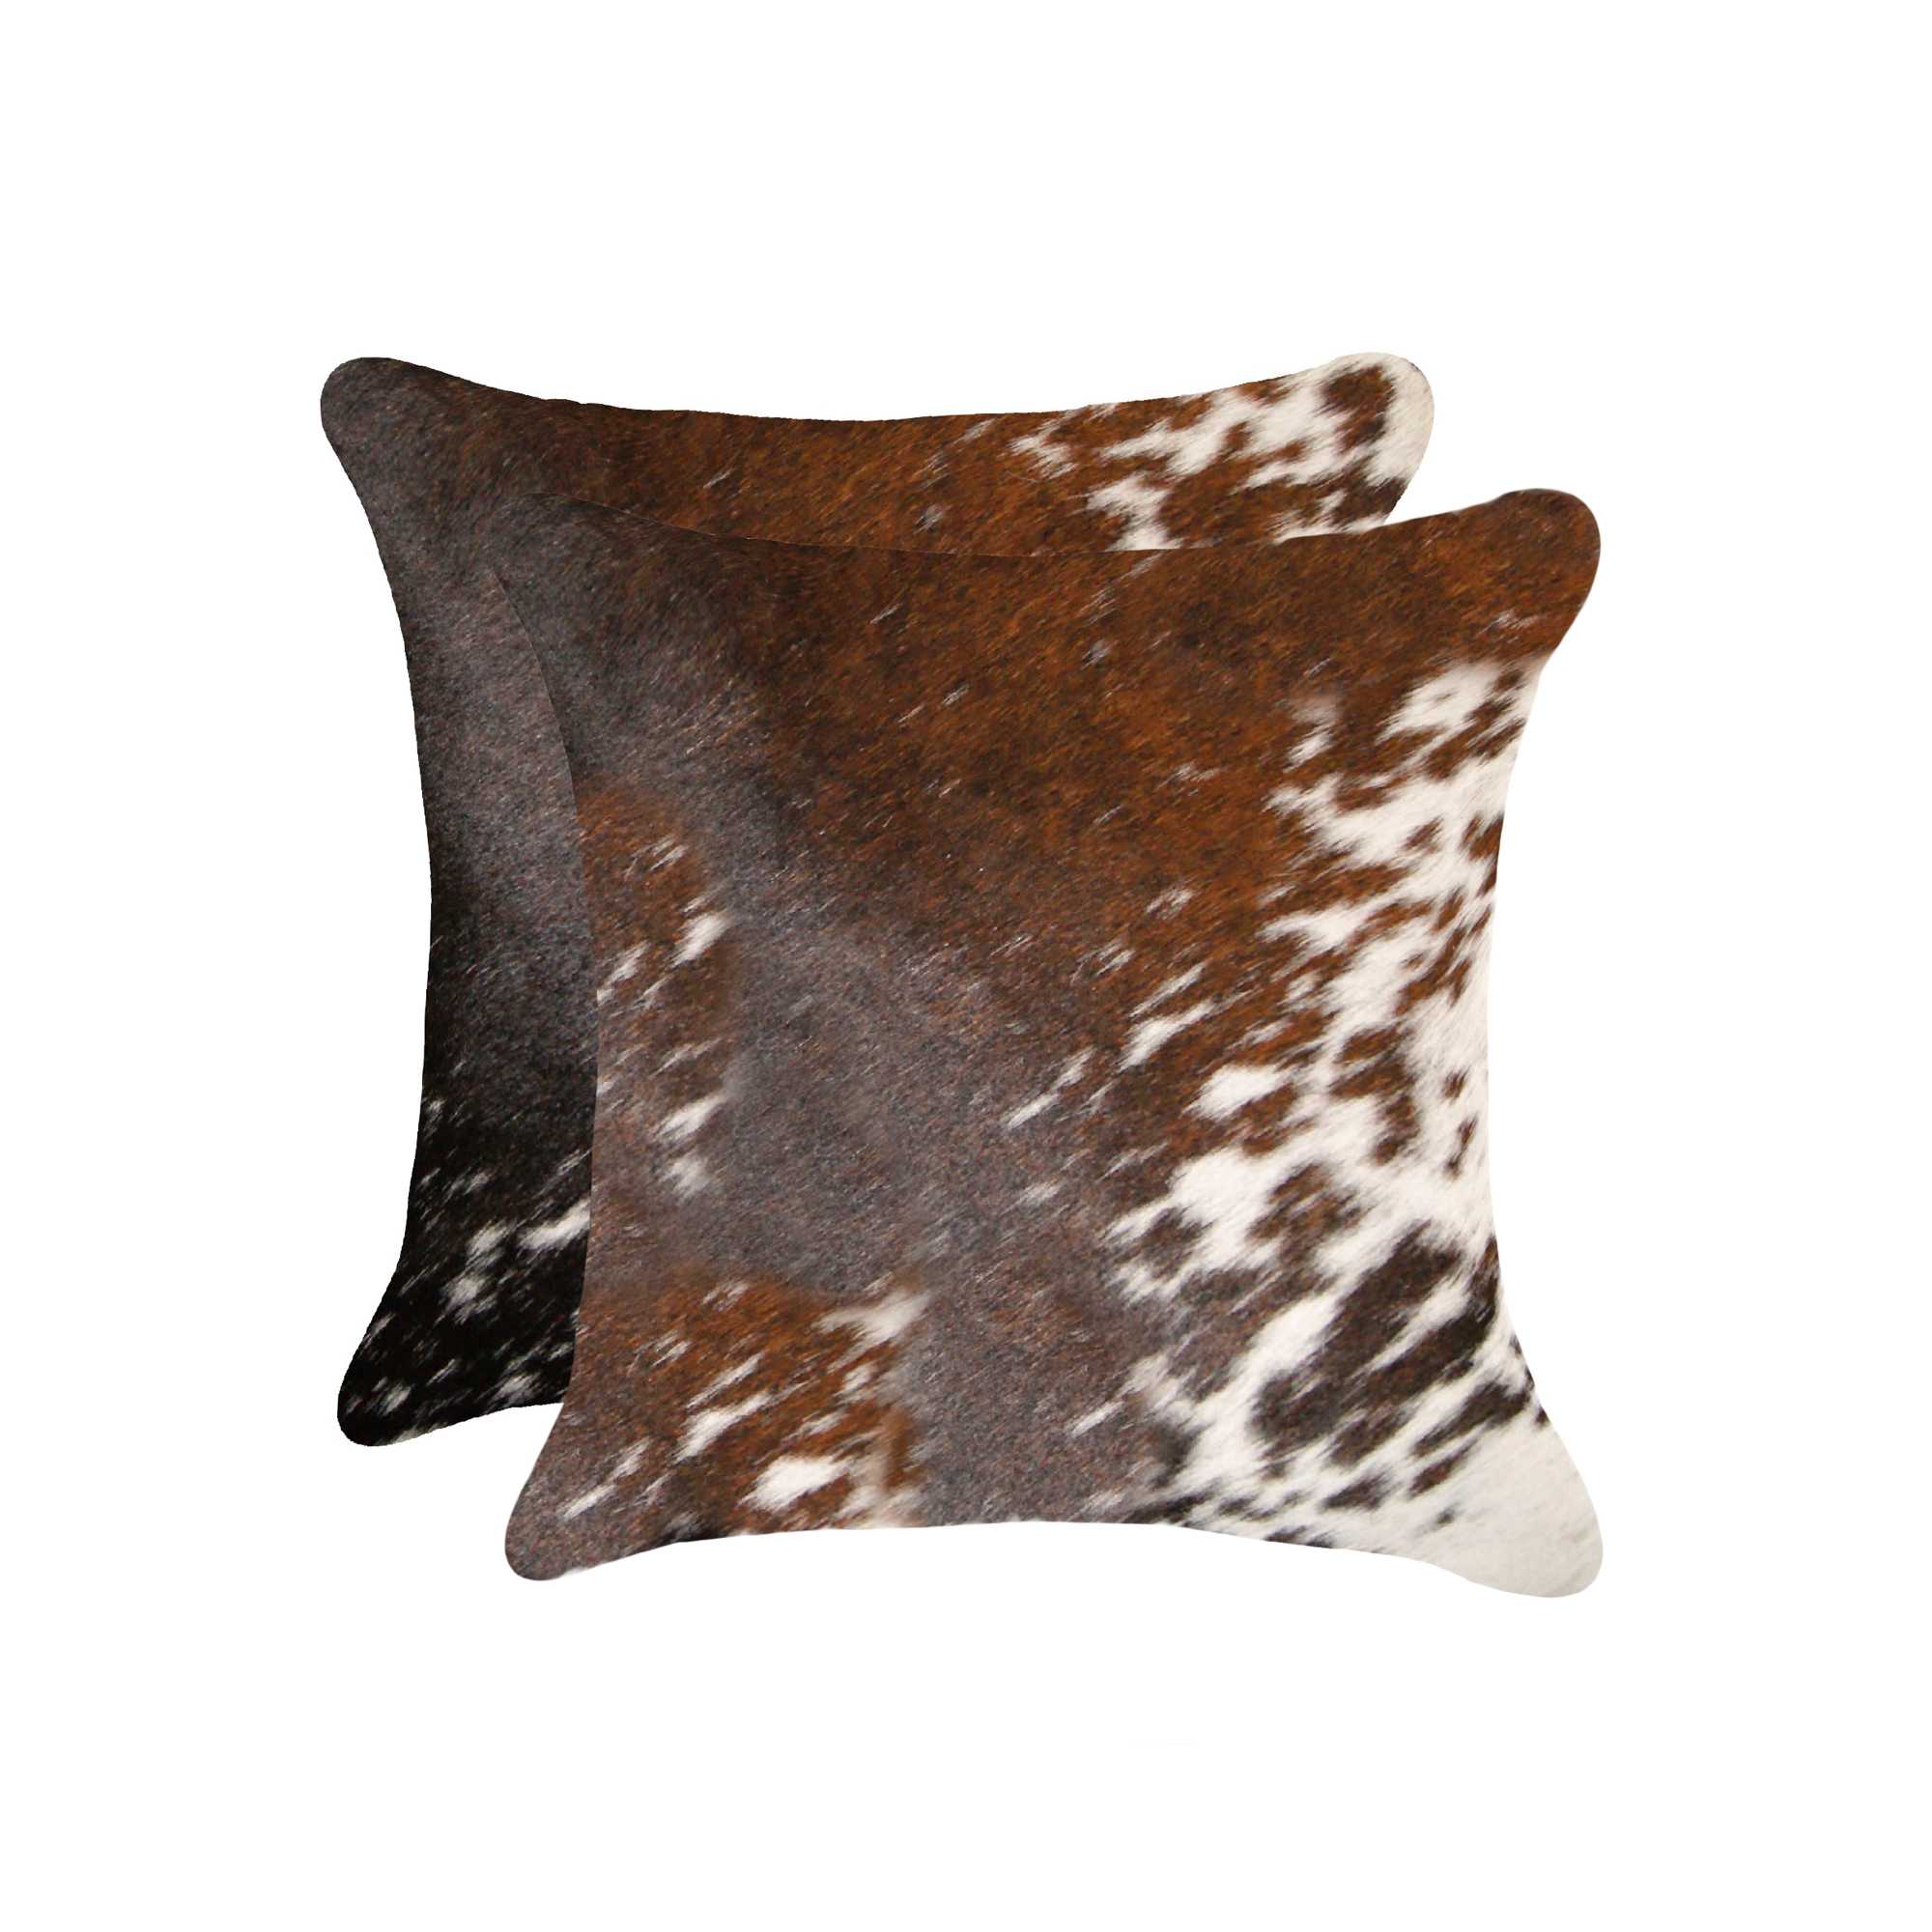 18" x 18" x 5" Salt And Pepper Brown And White, Cowhide - Pillow 2-Pack